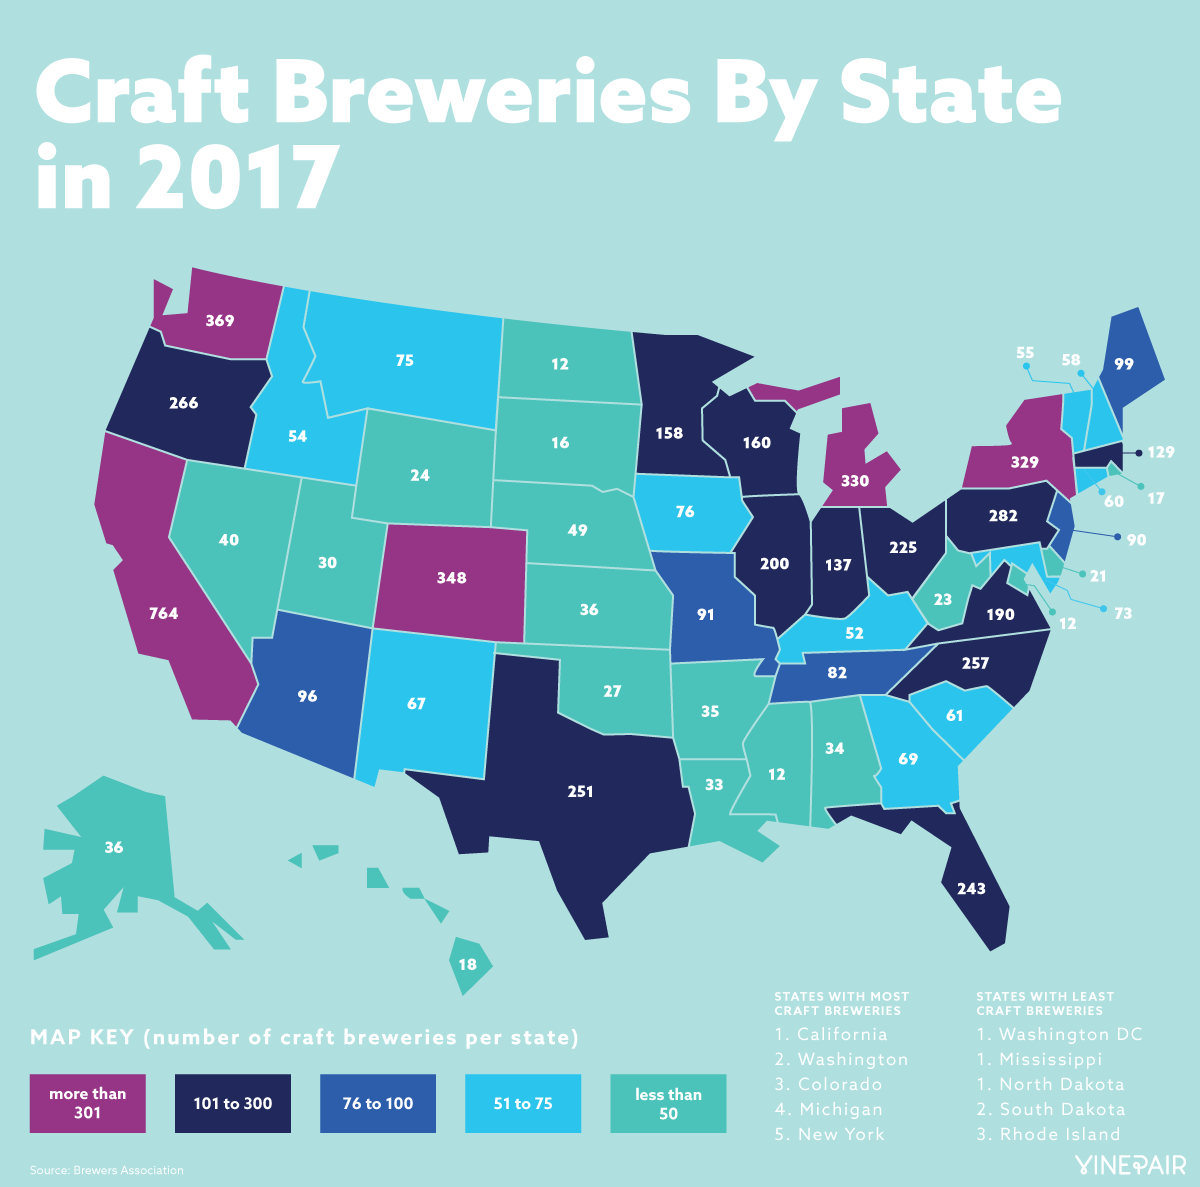 Craft Breweries By State in 2017